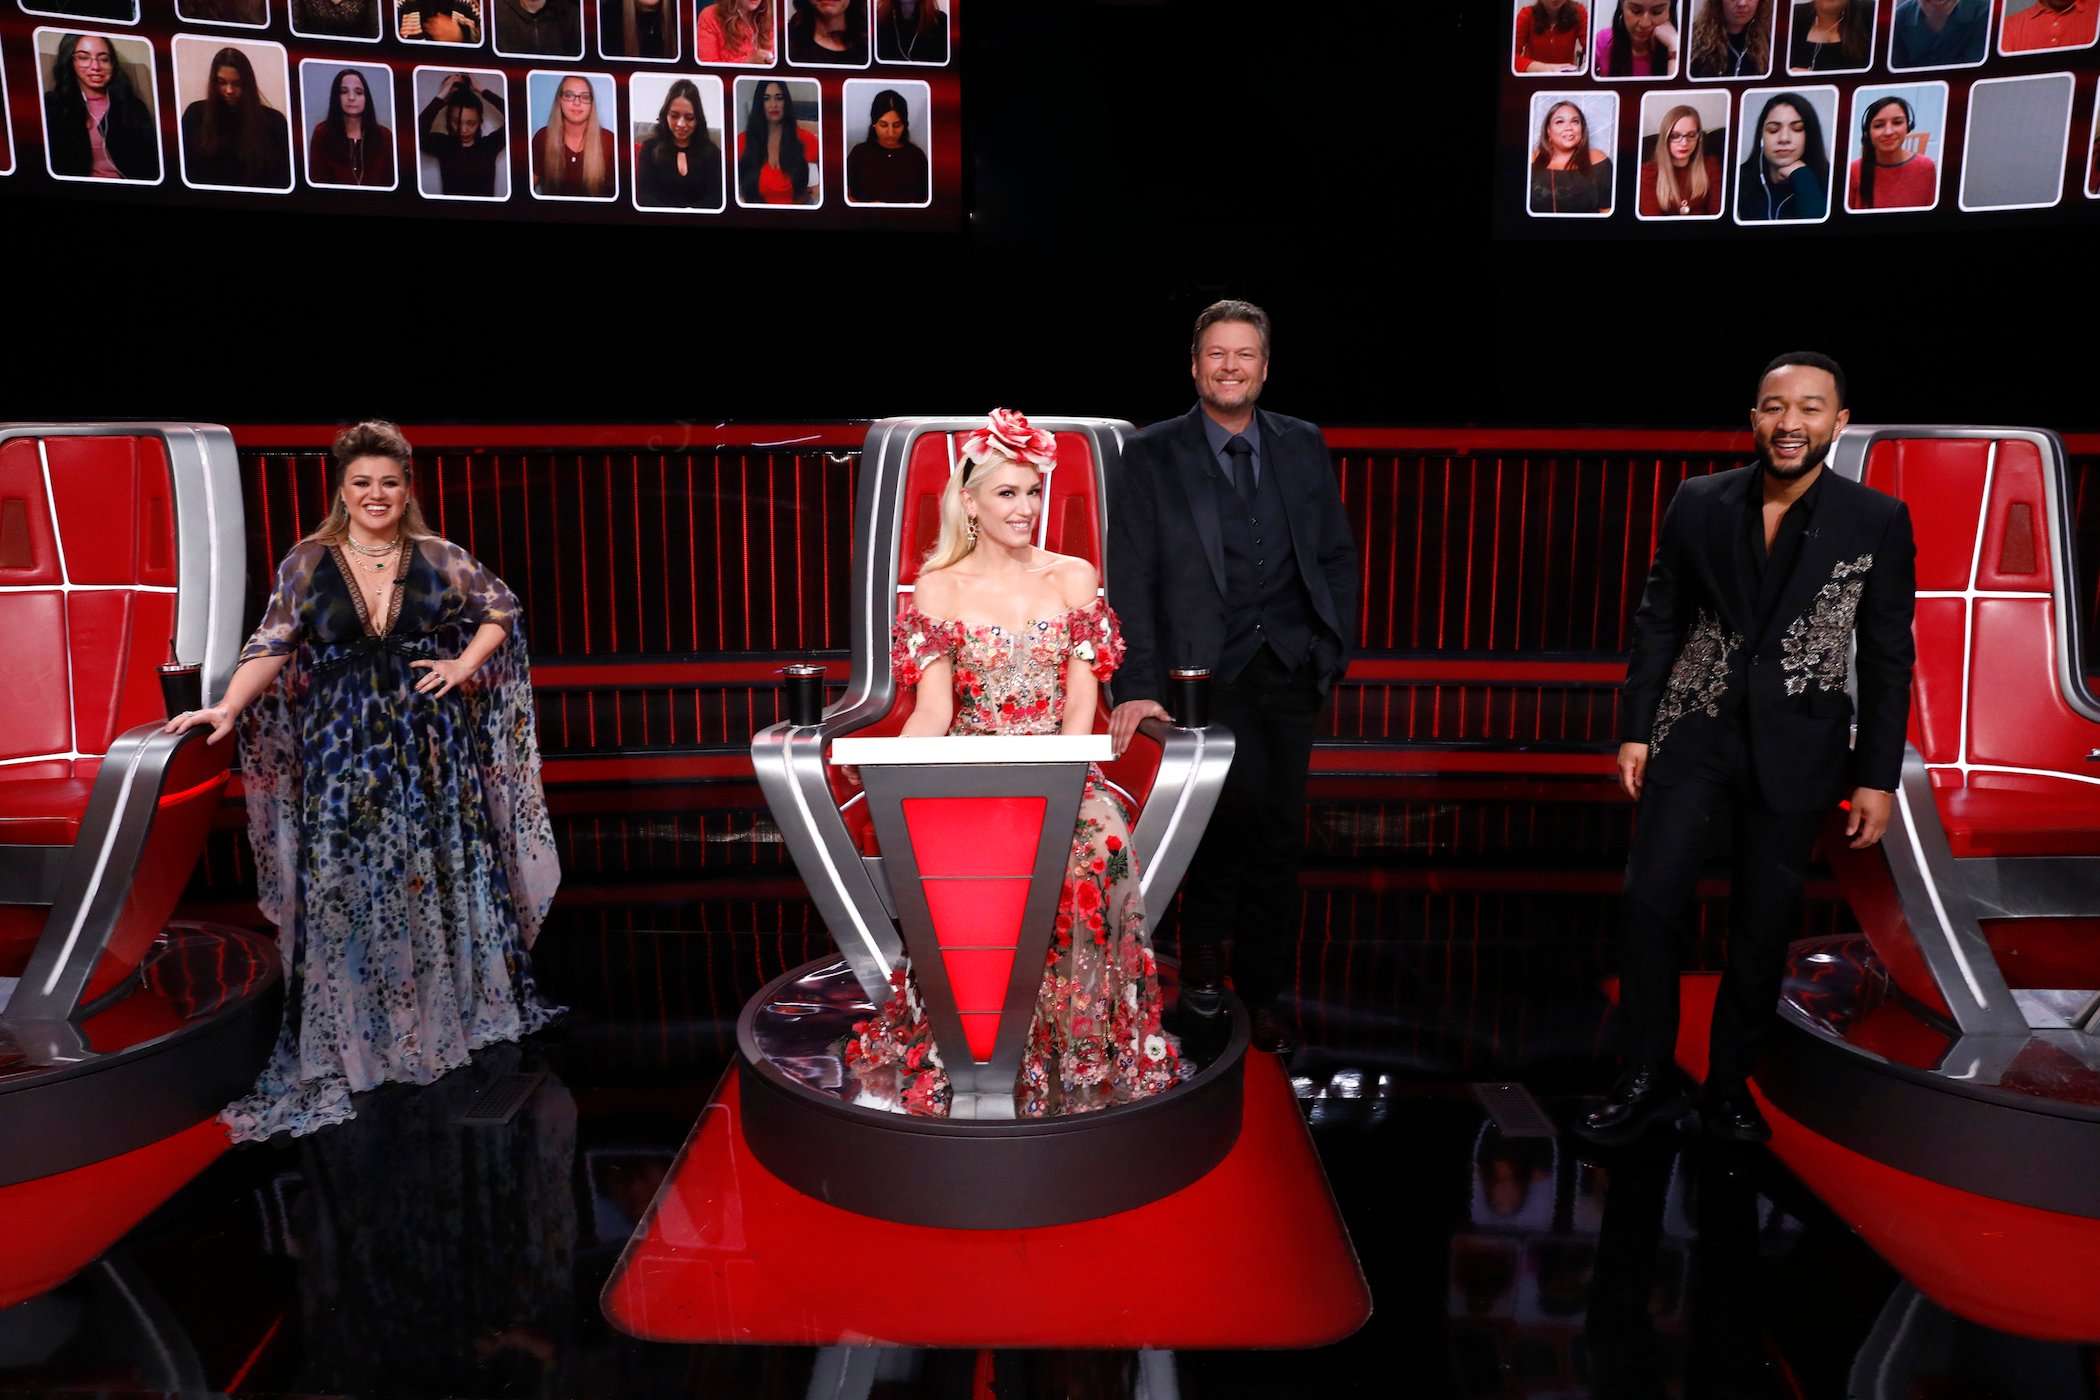 Kelly Clarkson, Gwen Stefani, Blake Shelton, and John Legend all sitting together as judges on 'The Voice' 